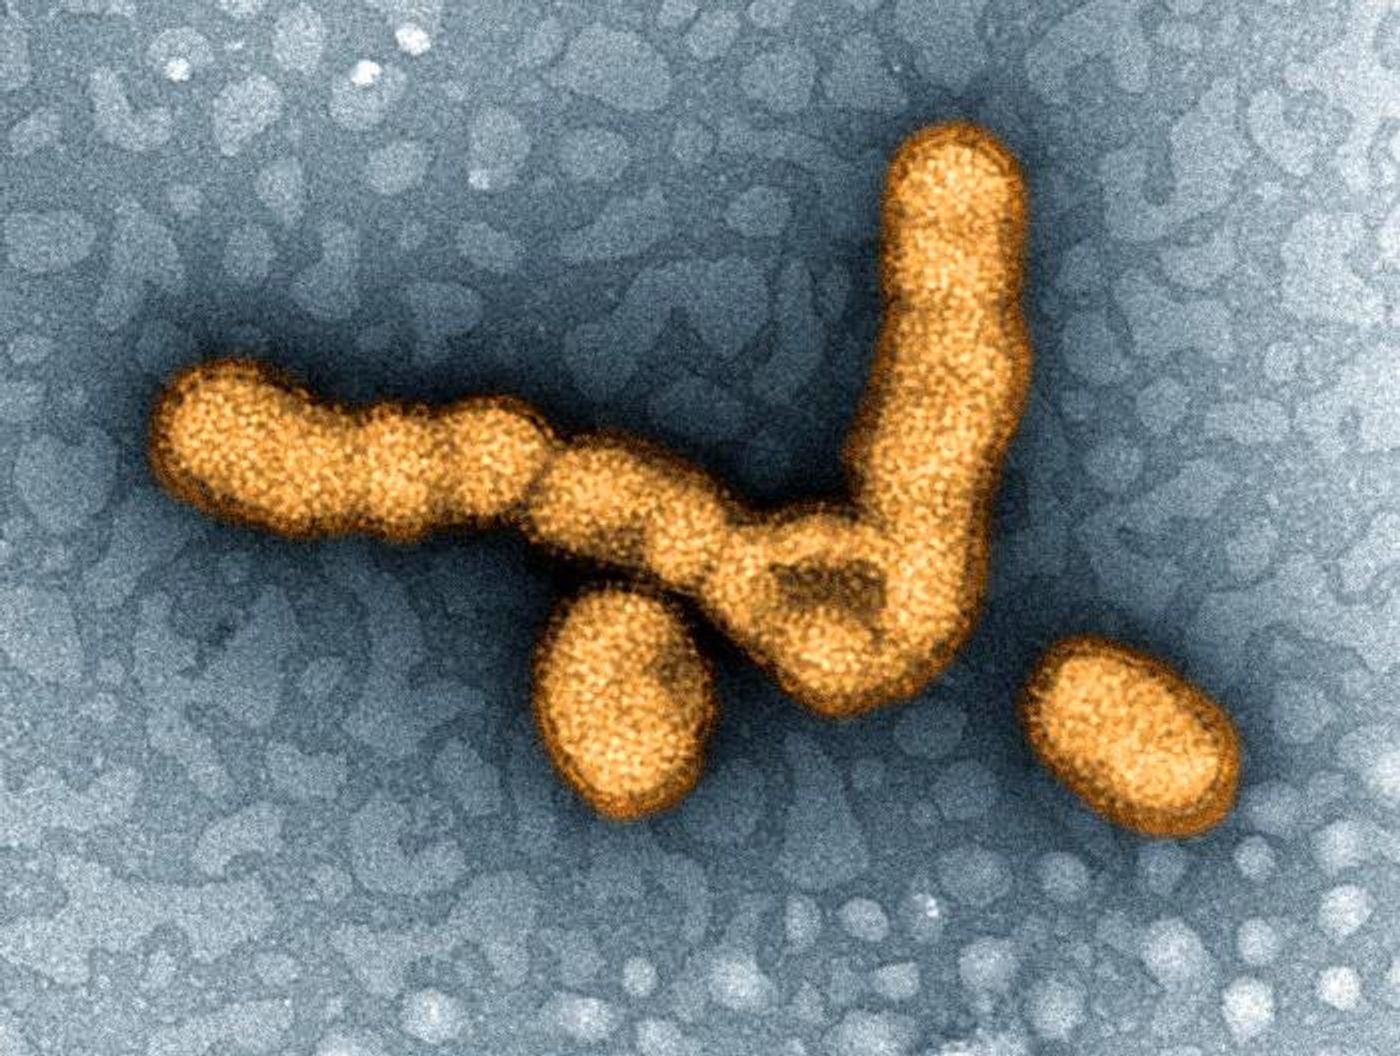 A digitally colorized TEM image, depicts a small grouping of H1N1 influenza virus particles. / Credit: National Institute of Allergy and Infectious Diseases (NIAID)